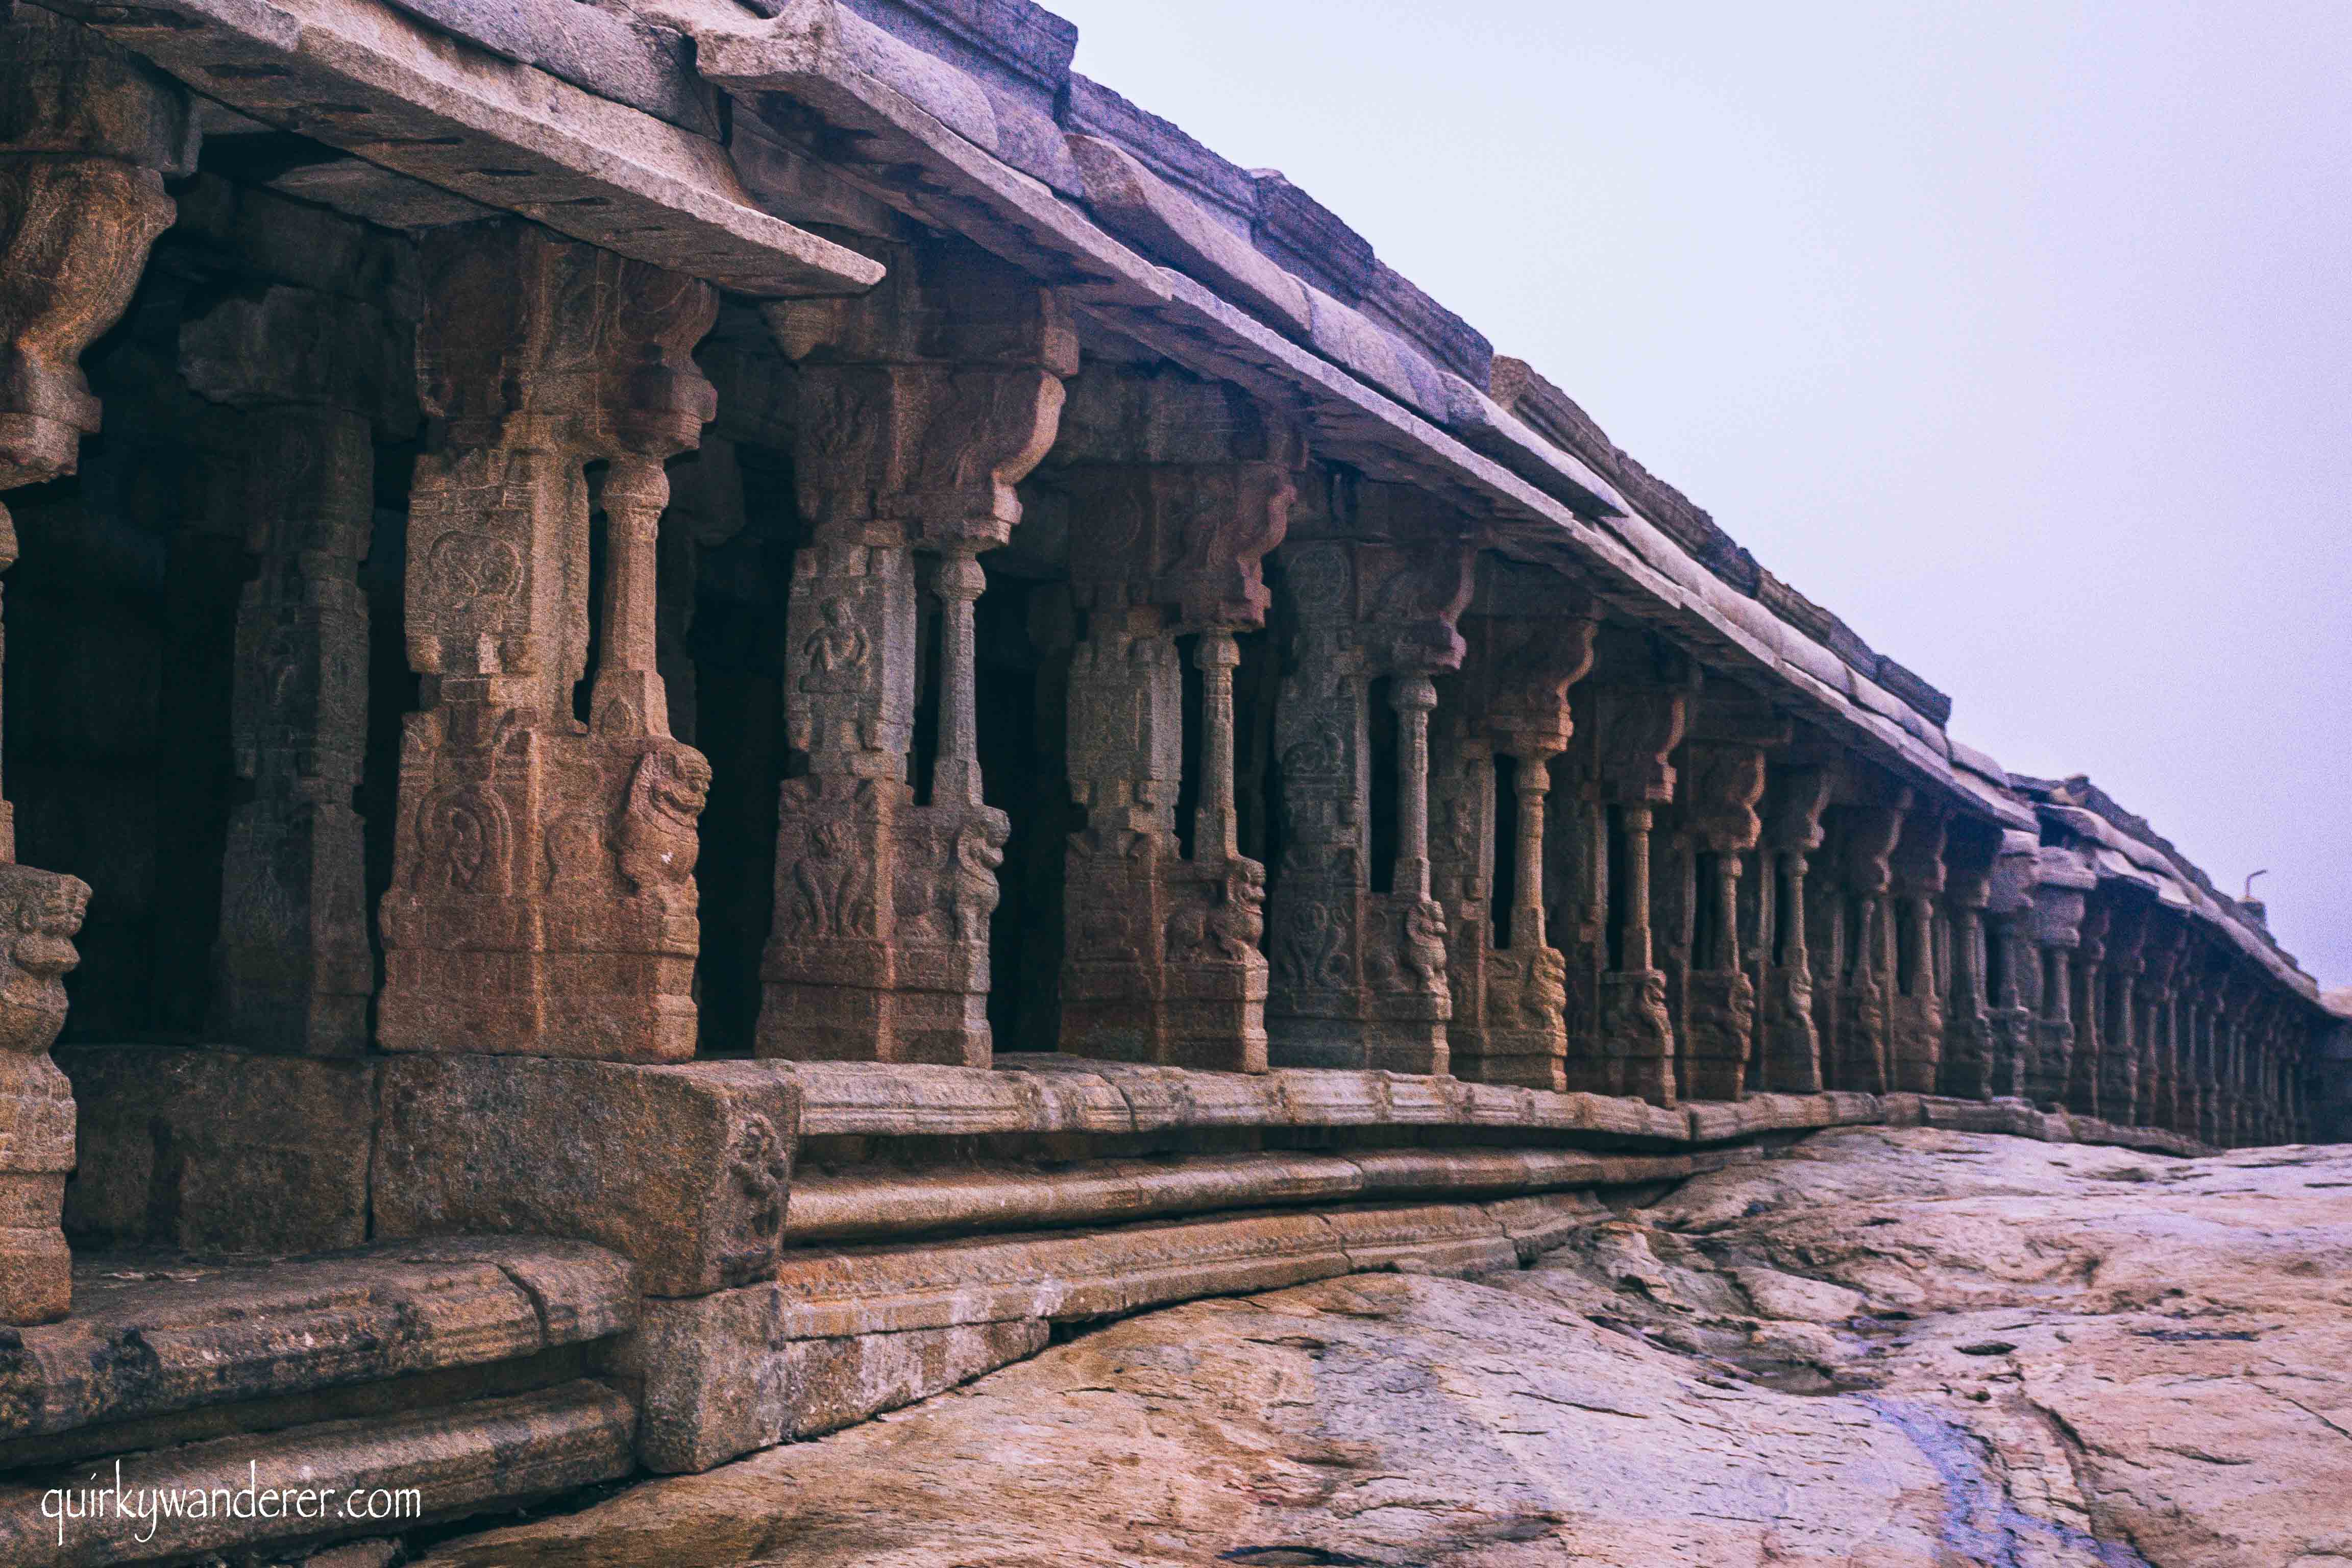 Lepakshi is a small town in Andhra Pradesh and makes for an ideal getaway from Bangalore. It is known for the famous Veerbhadra temple whose 16th century stone architecture is worth a mention.